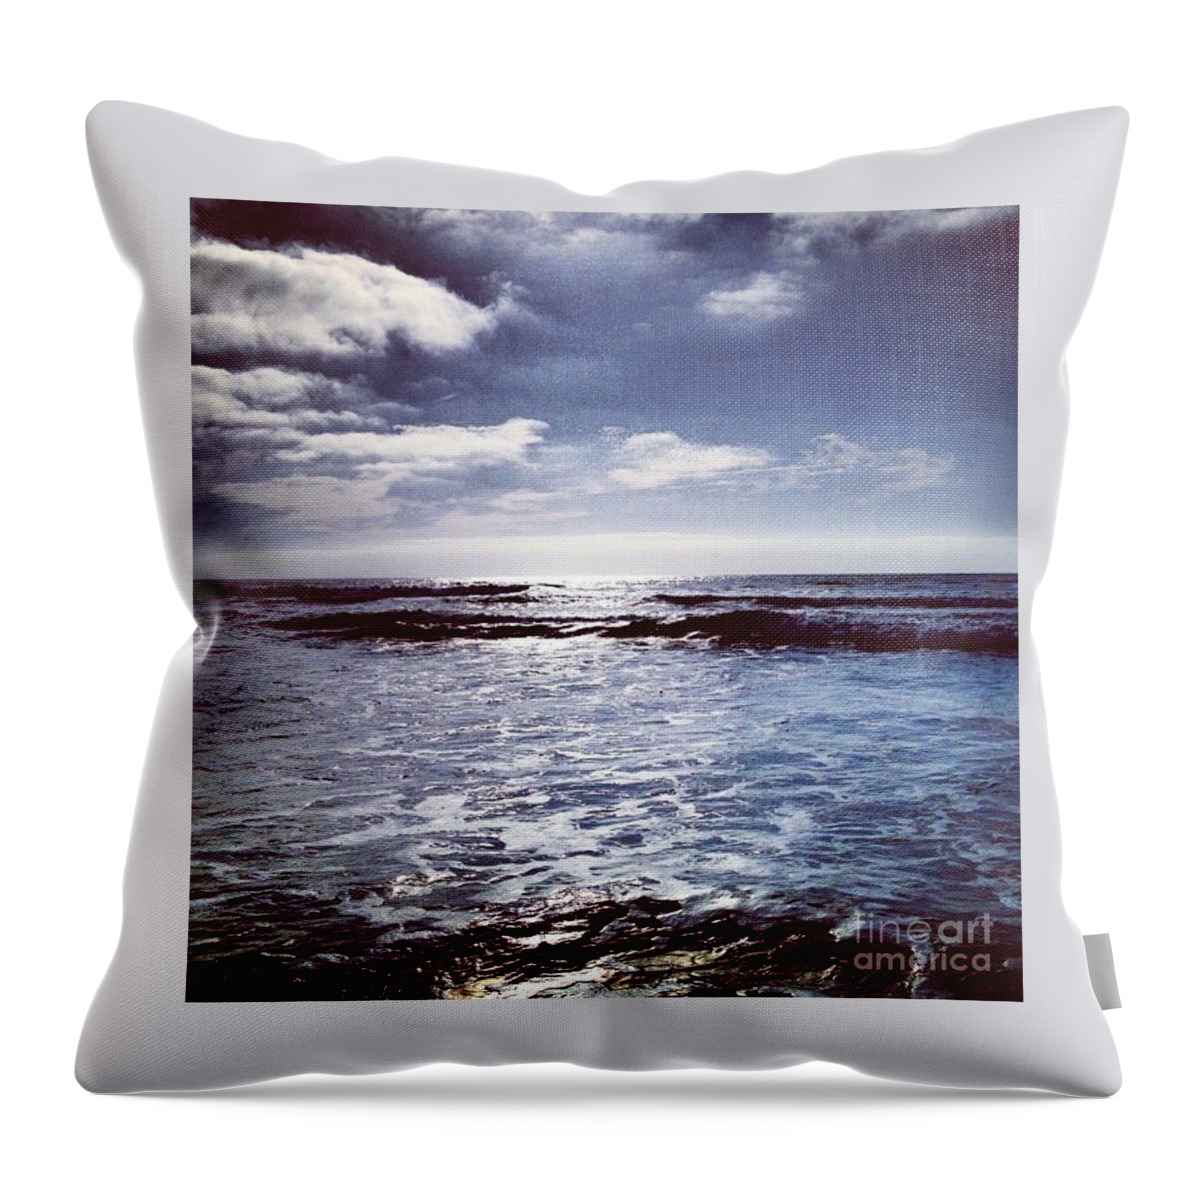 Pacific Ocean Throw Pillow featuring the photograph Del Mar Storm by Denise Railey